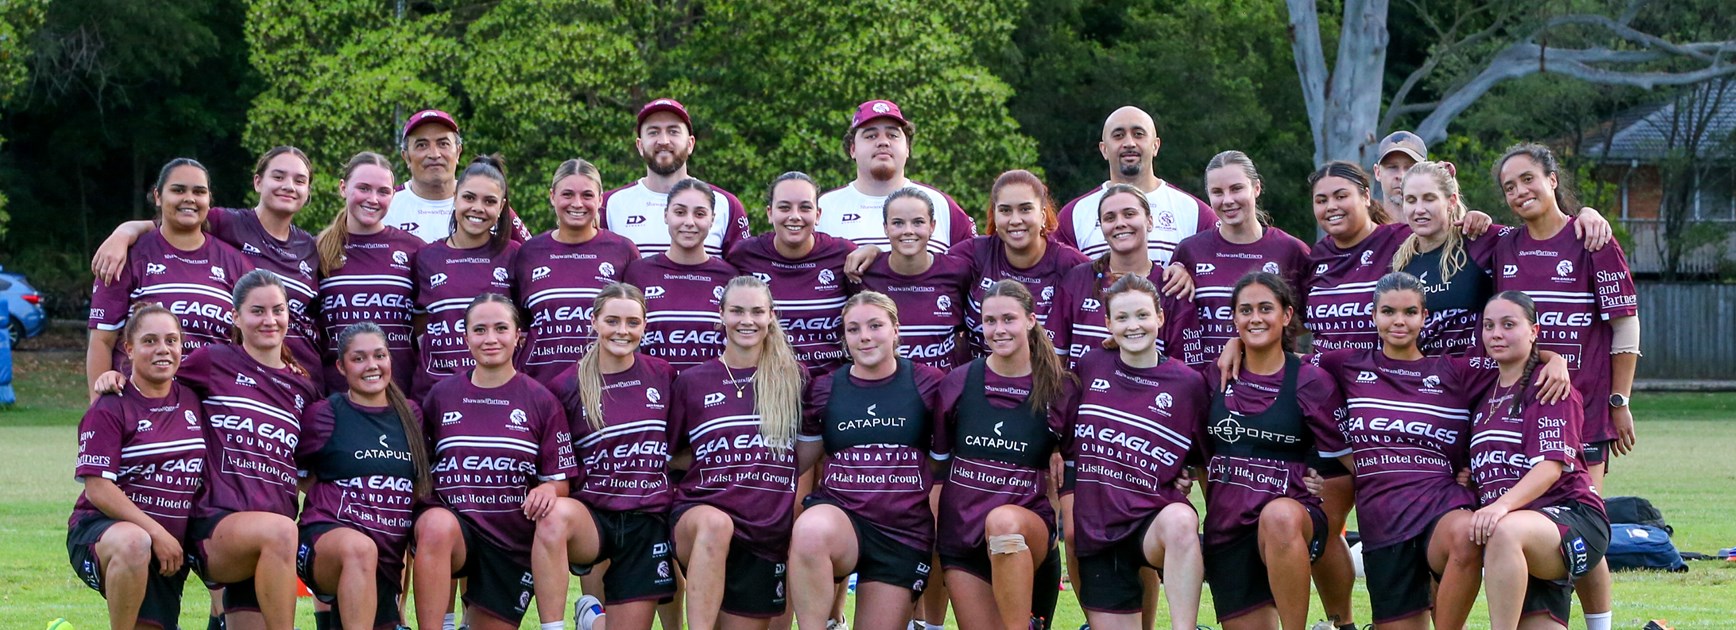 Training underway for Manly's Harvey Norman Women's team